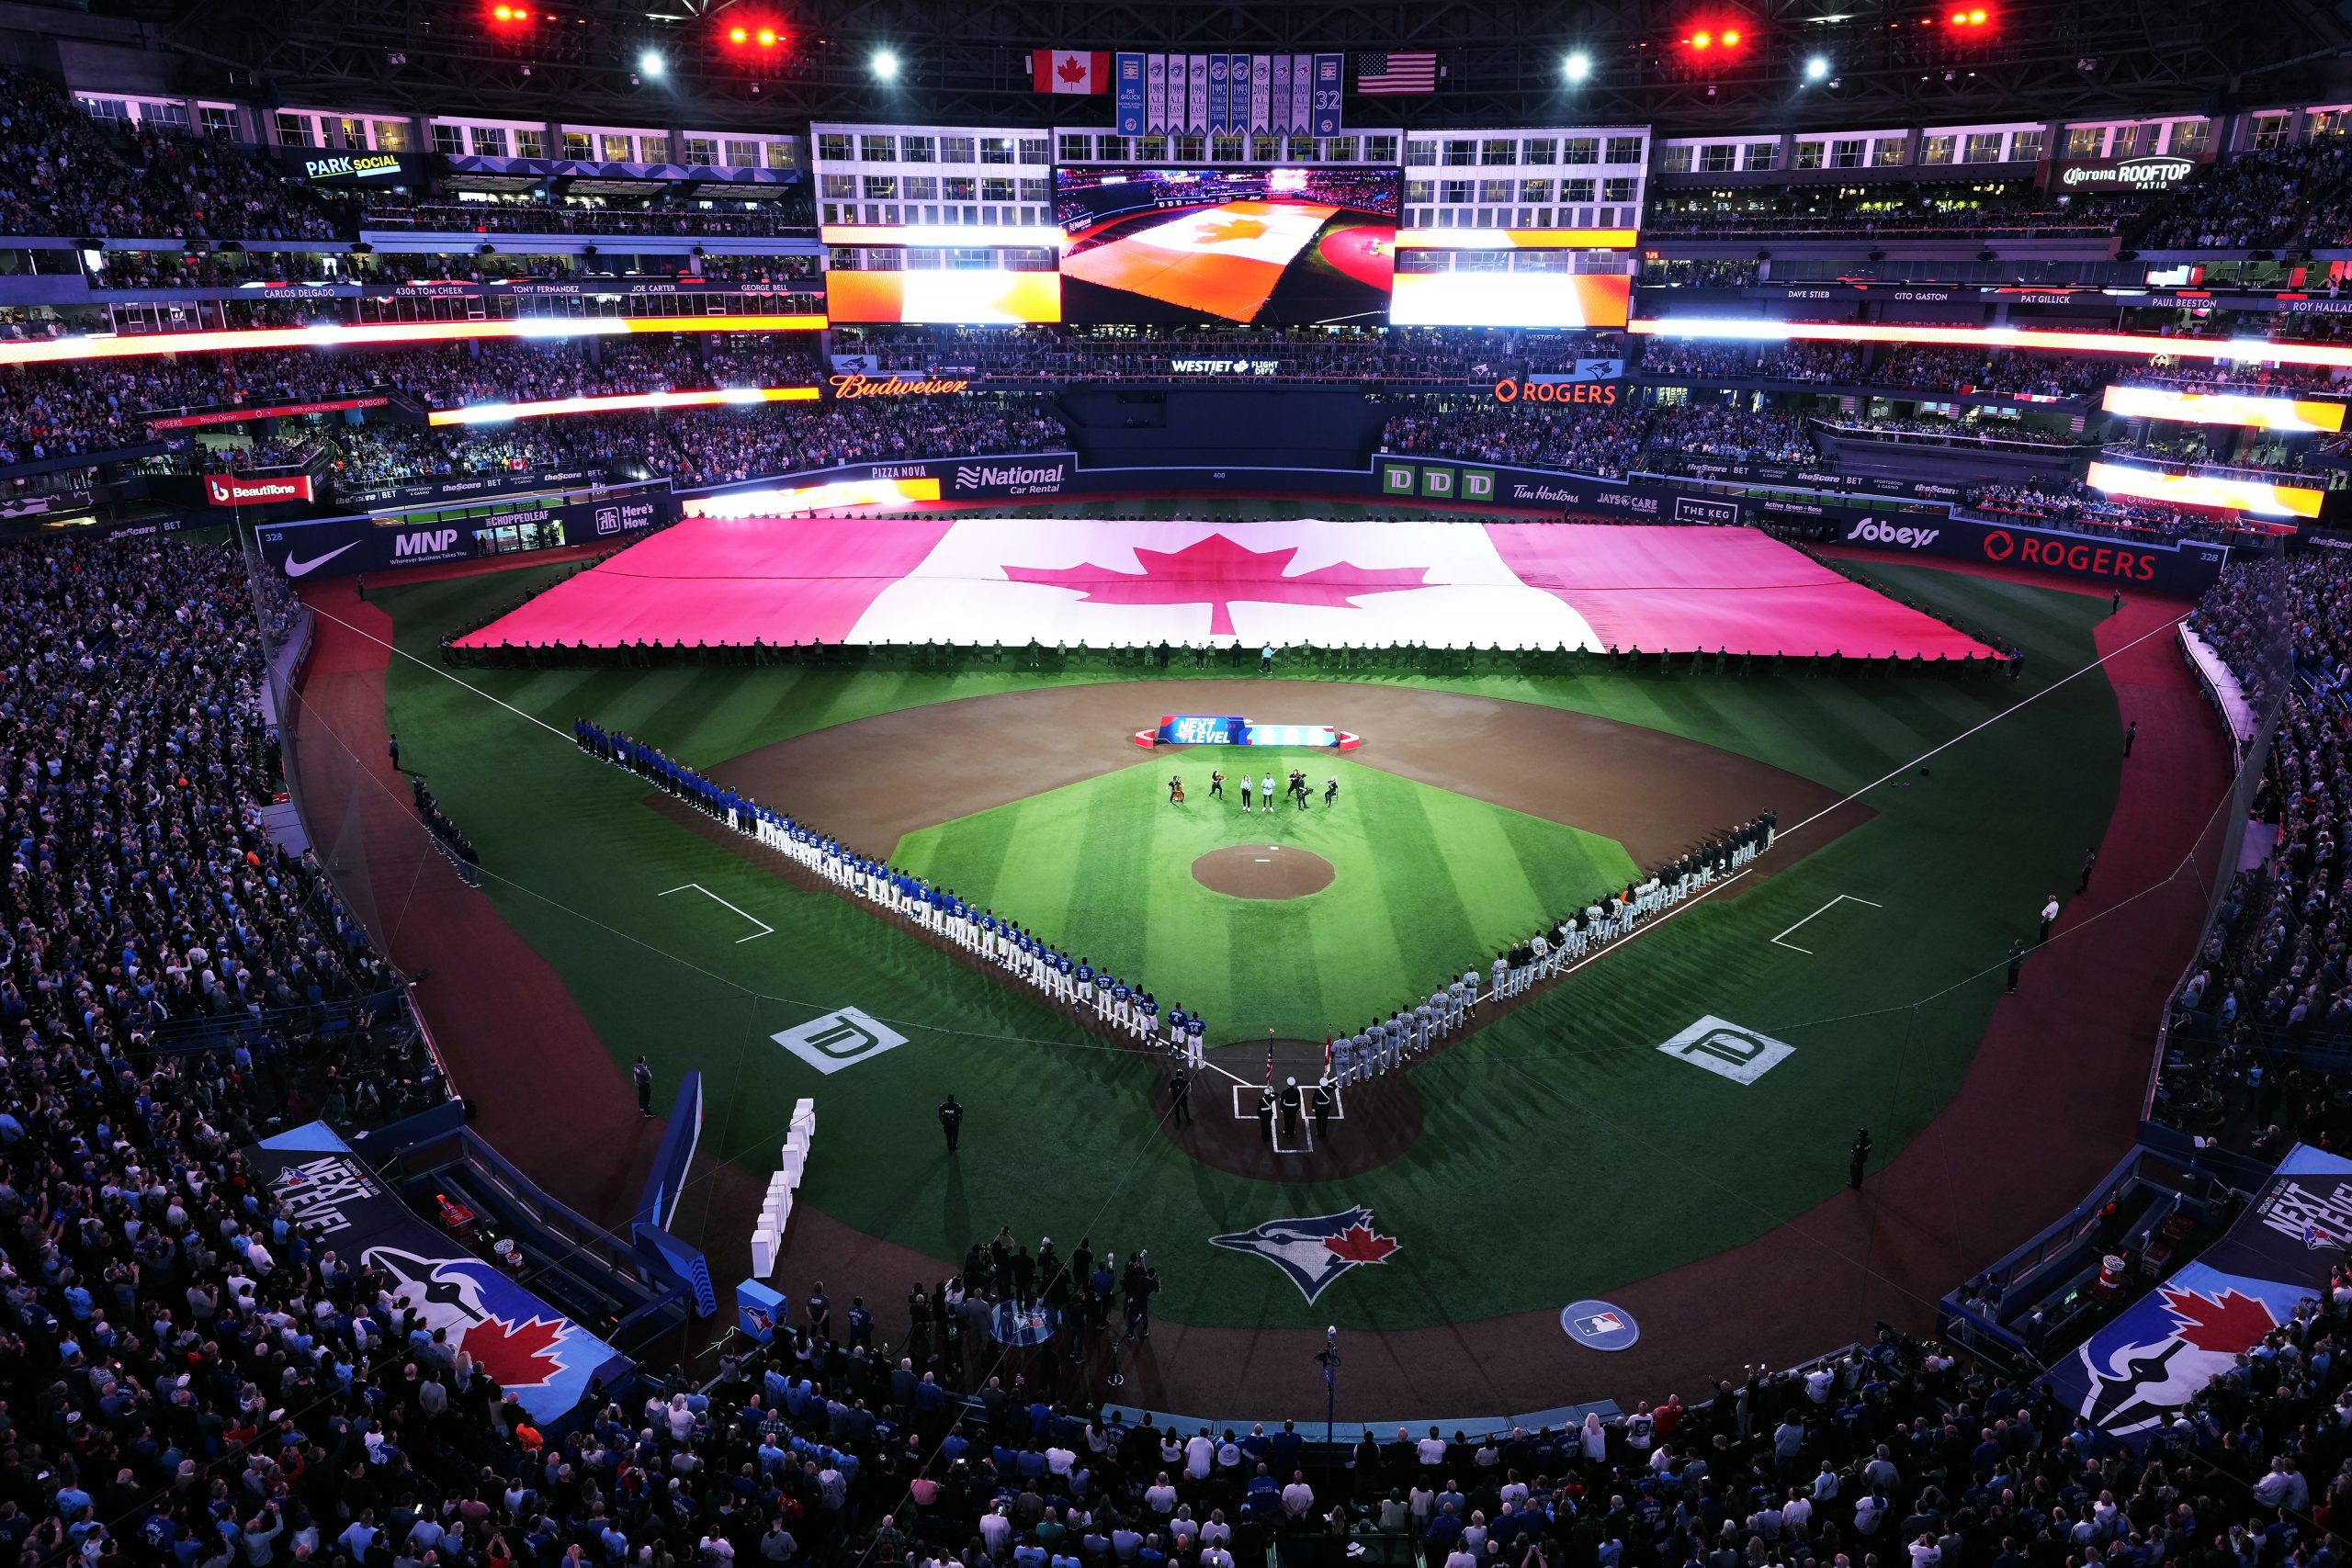 The Toronto Blue Jays first game on April 7, 1977.